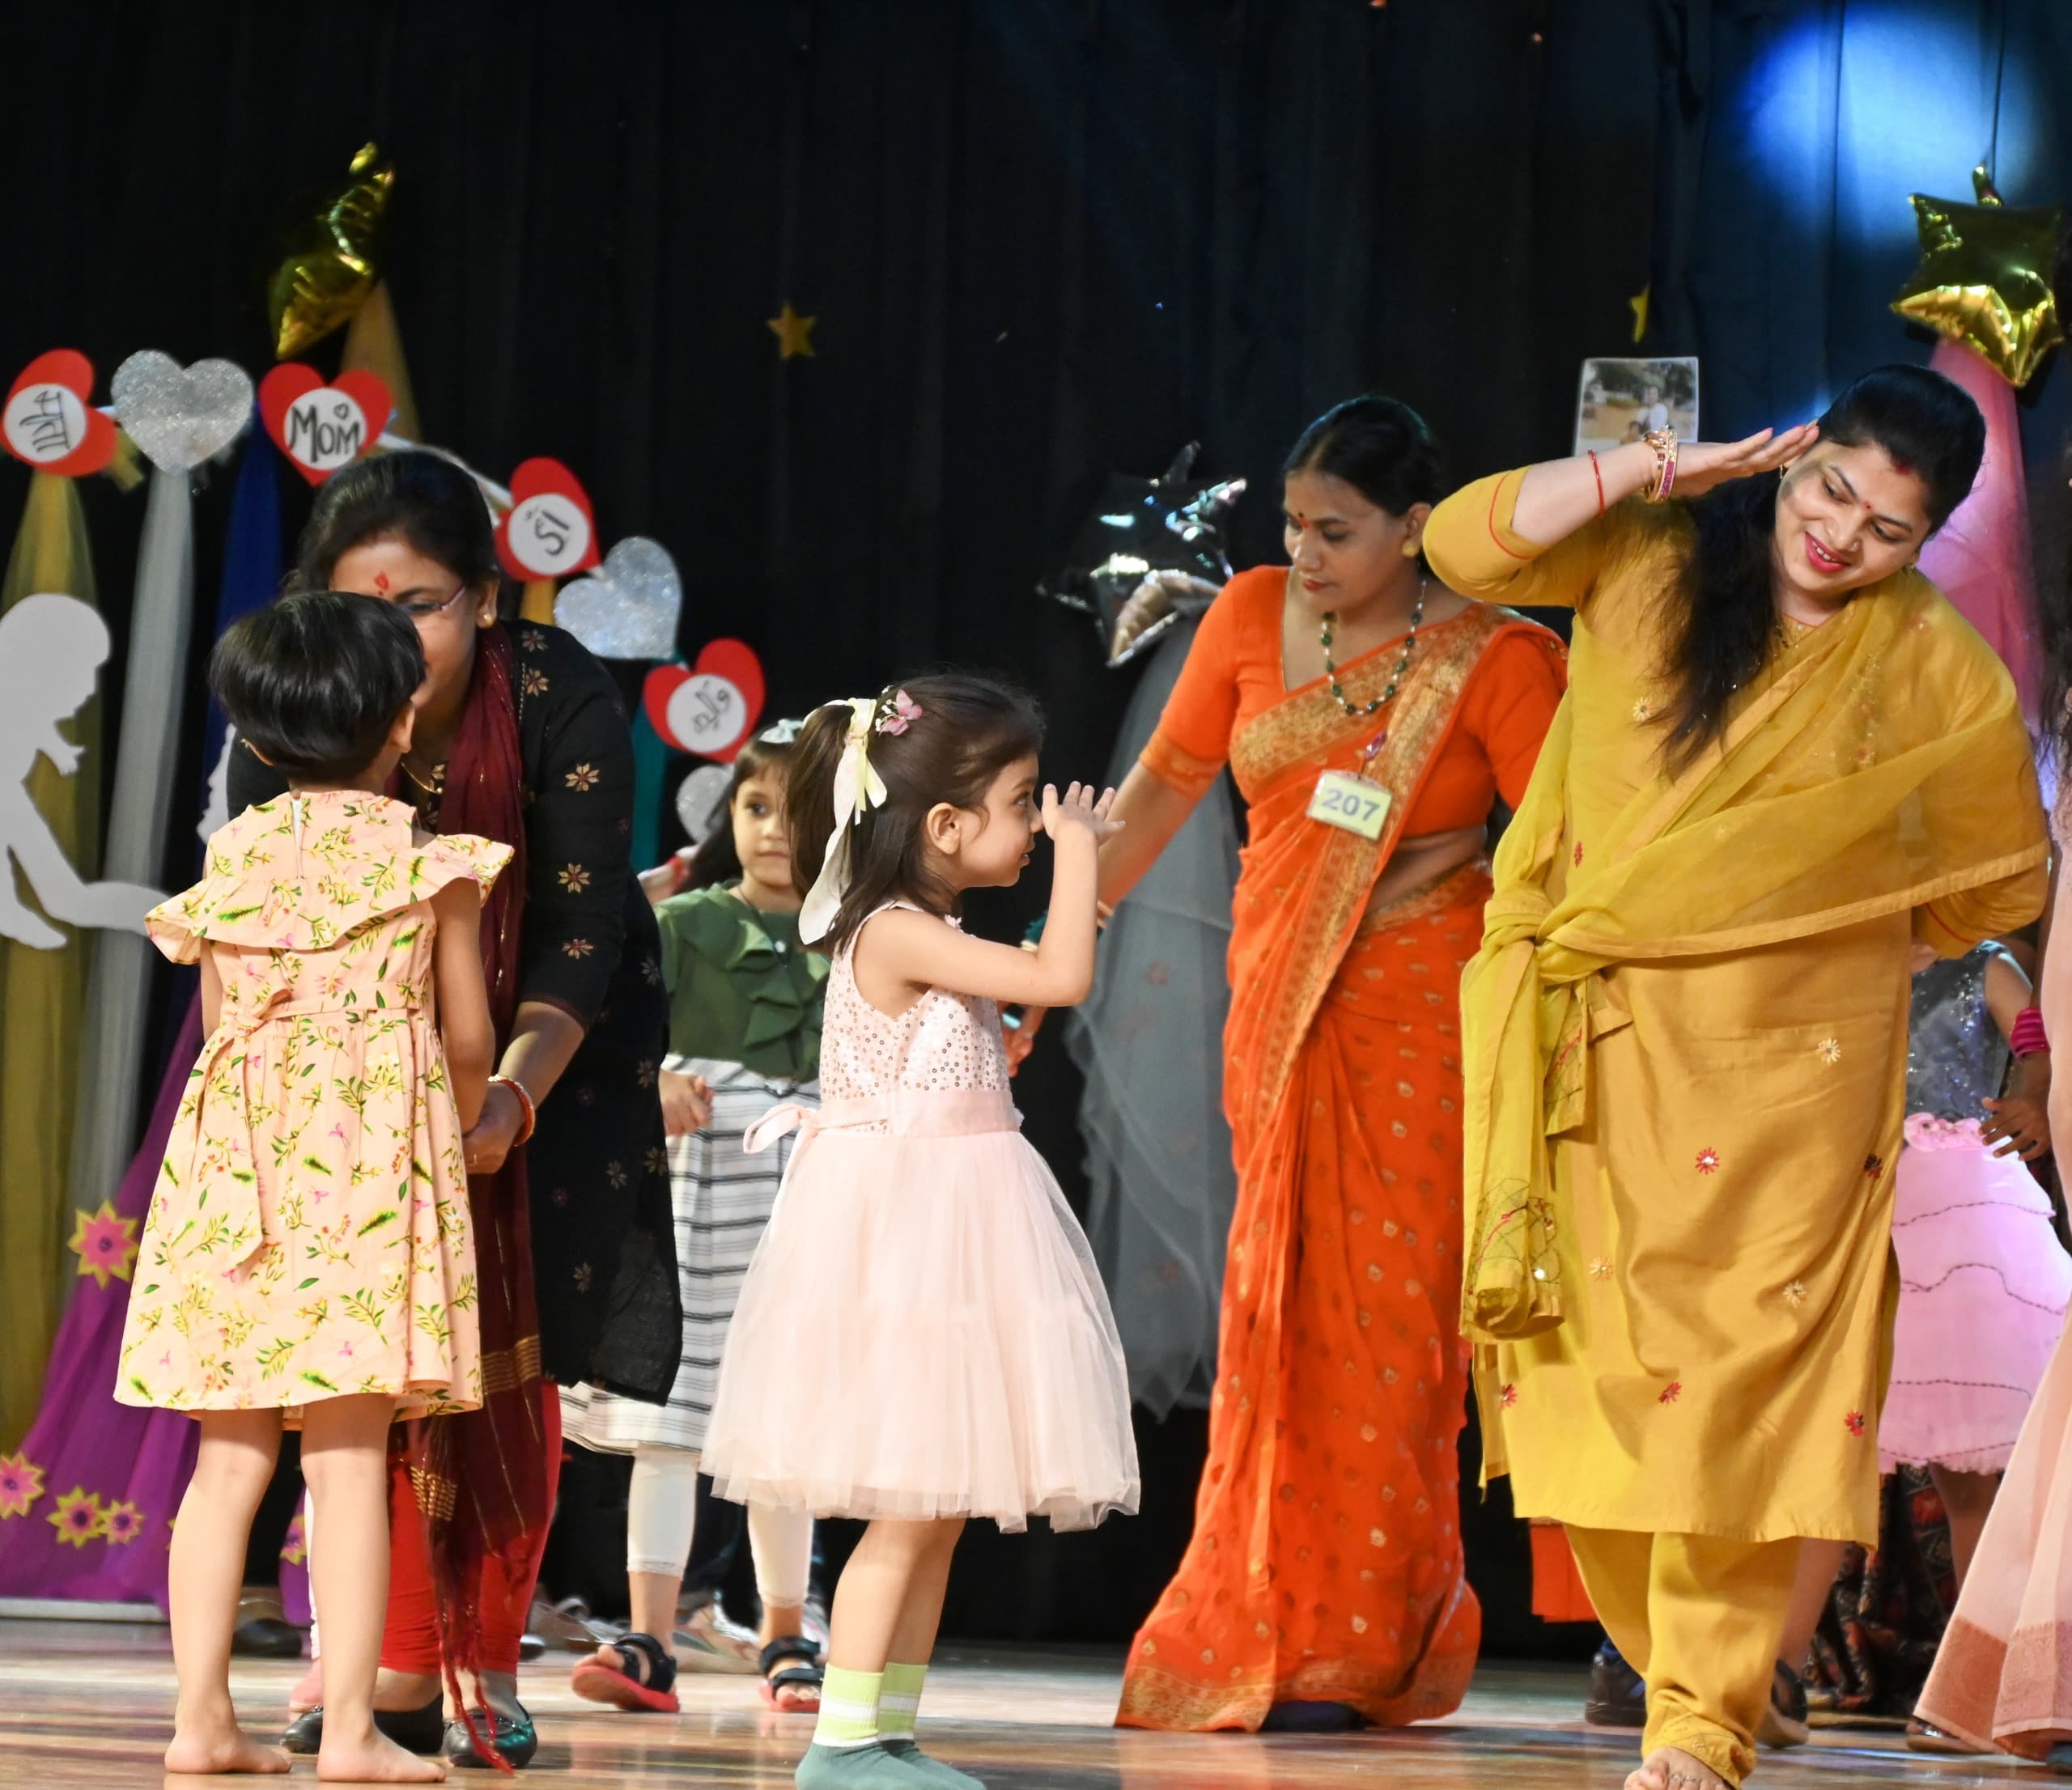 St. Joseph's children celebrated Mother's Day, children danced with their mother.